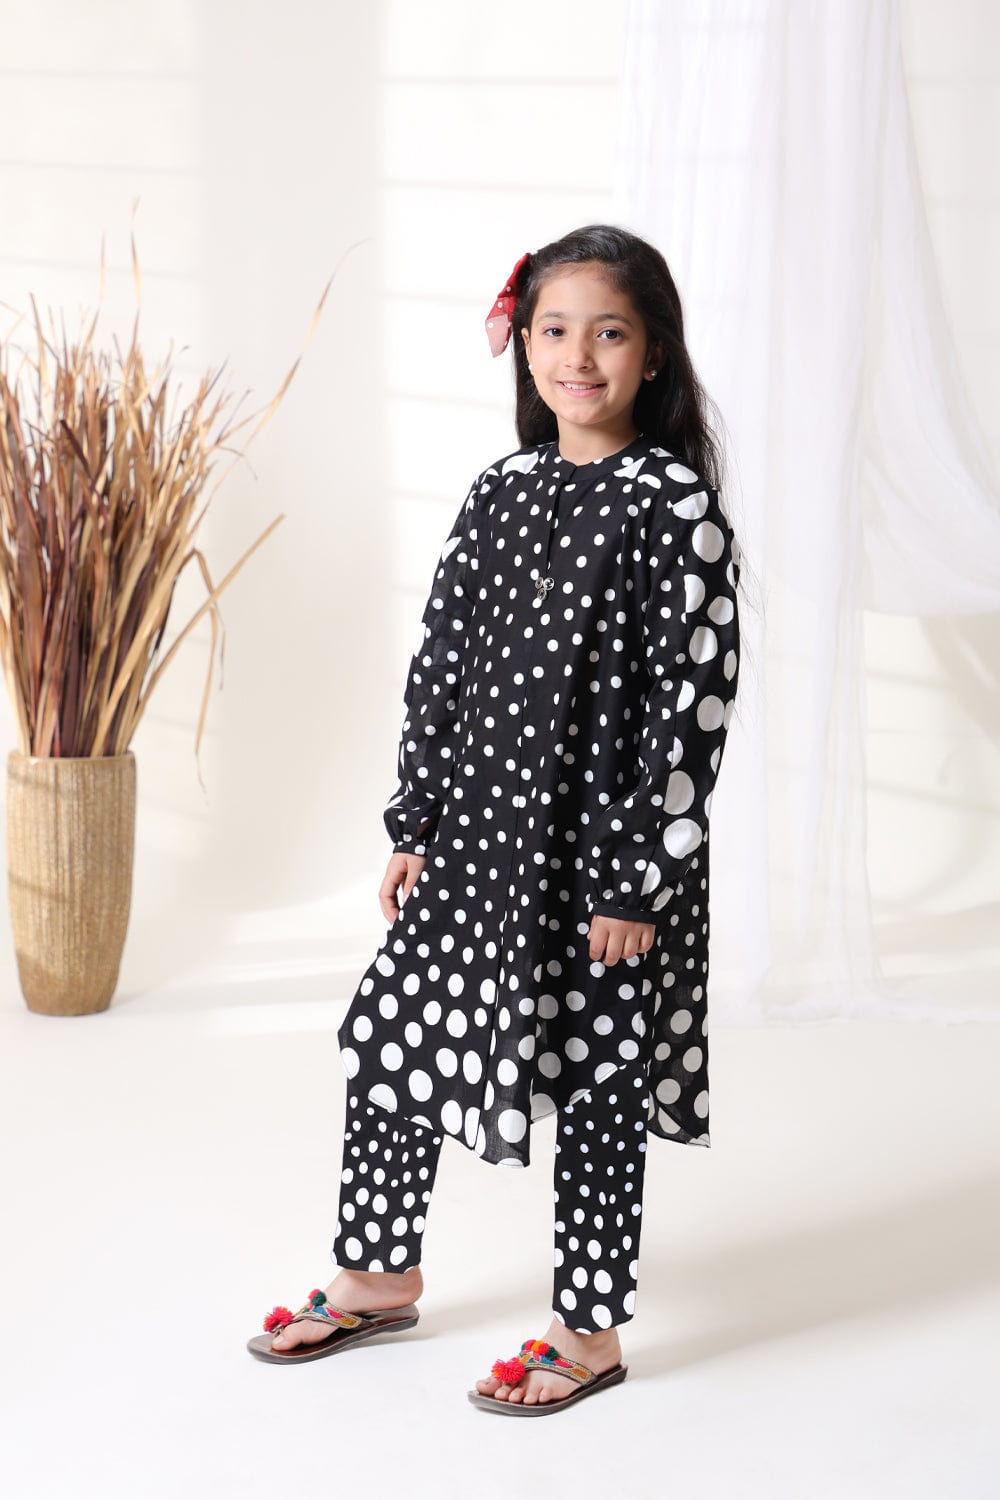 Hope Not Out by Shahid Afridi Eastern GIrls Trousers Girls Black Polka Dots Print Trouser Flora